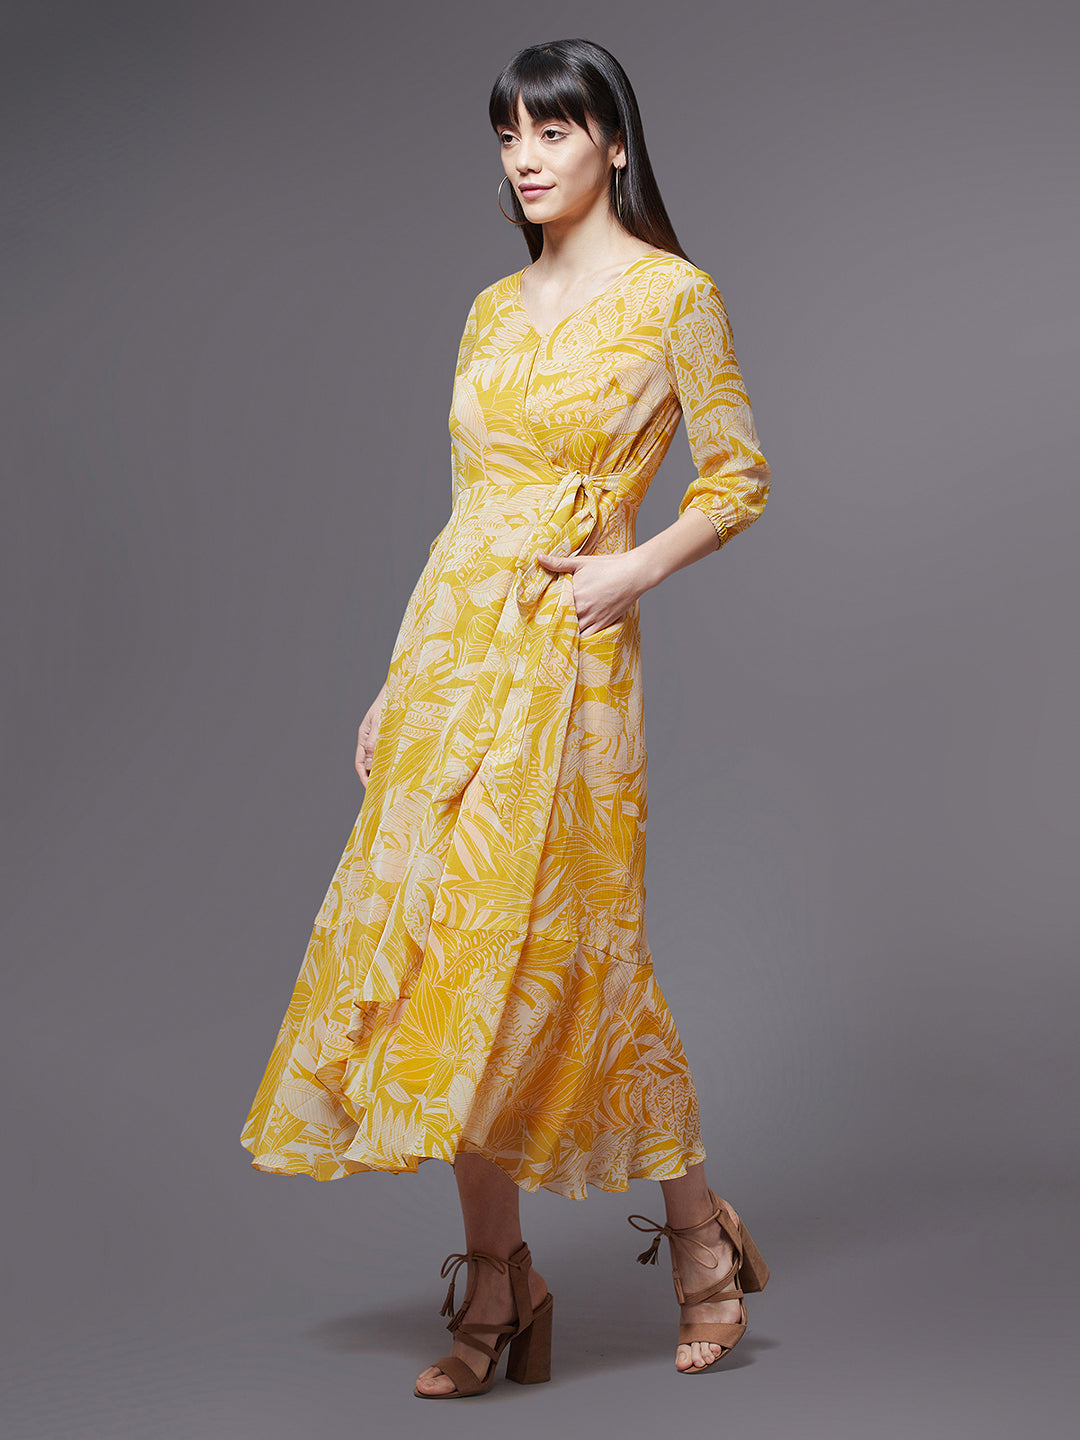 Women's Yellow & White V neck Full sleeve Floral Layered Maxi Dress